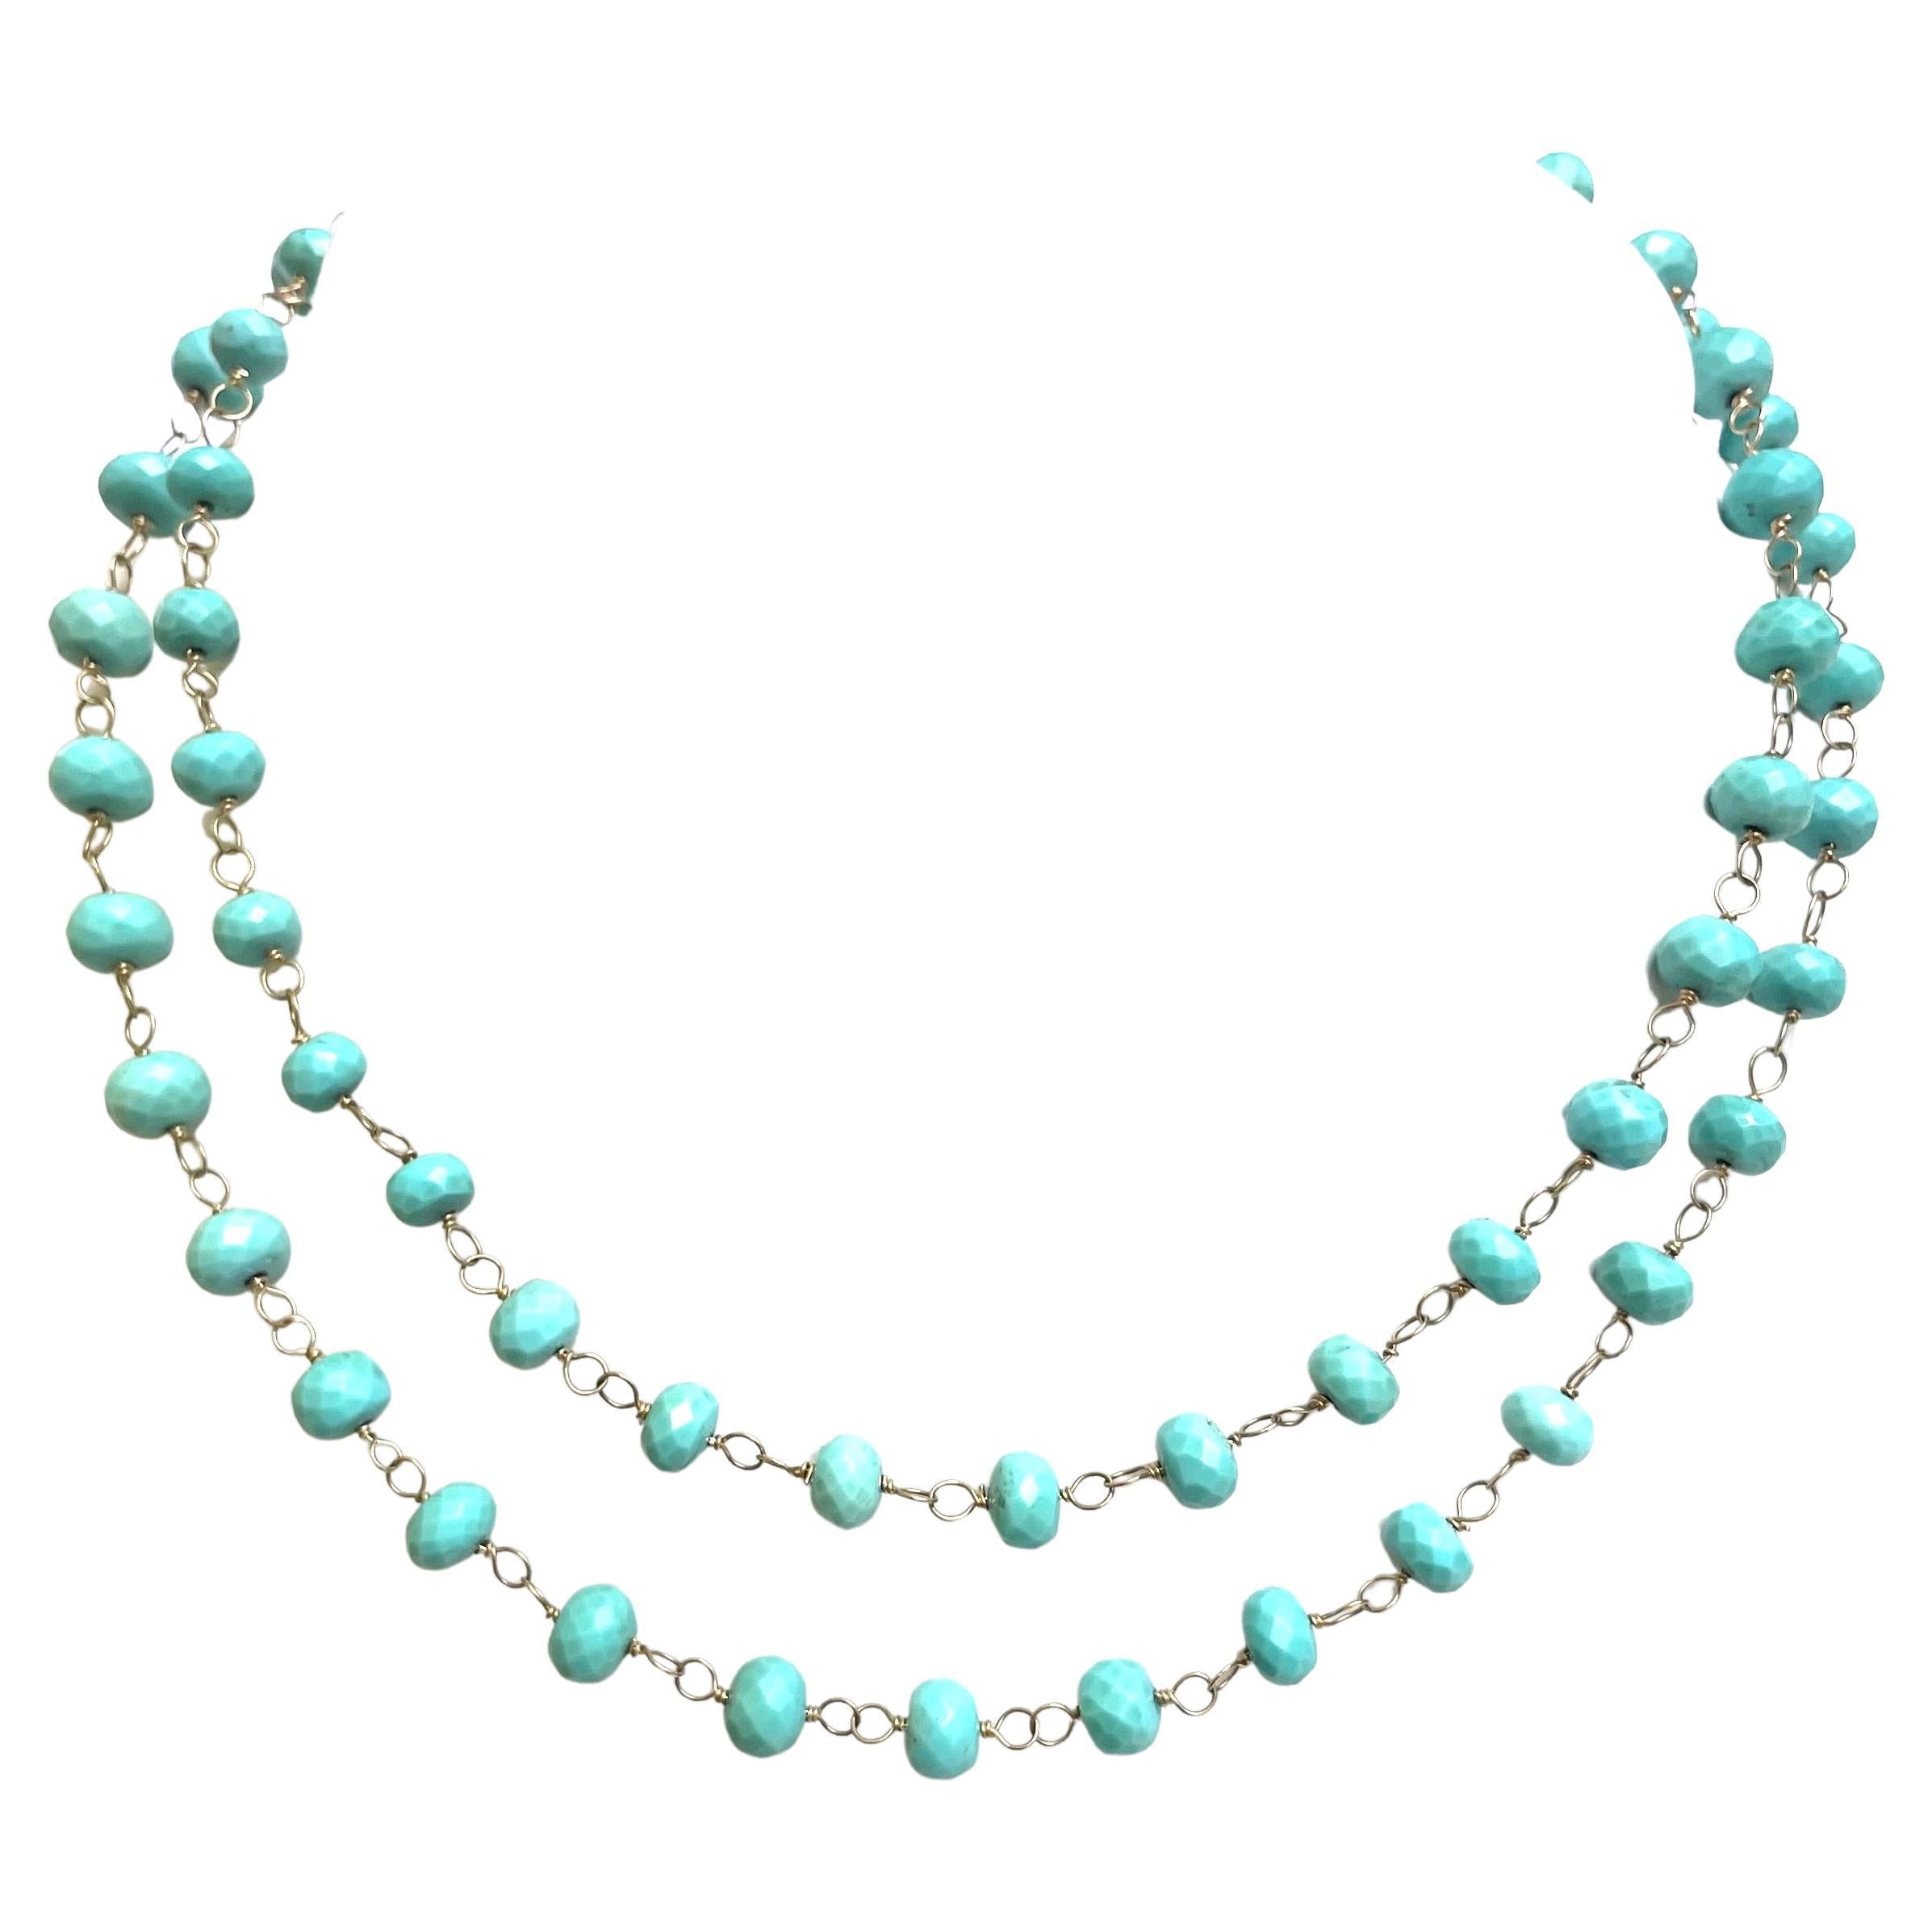 Sleeping Beauty Turquoise Long Paradizia Necklace (shown doubled) For Sale